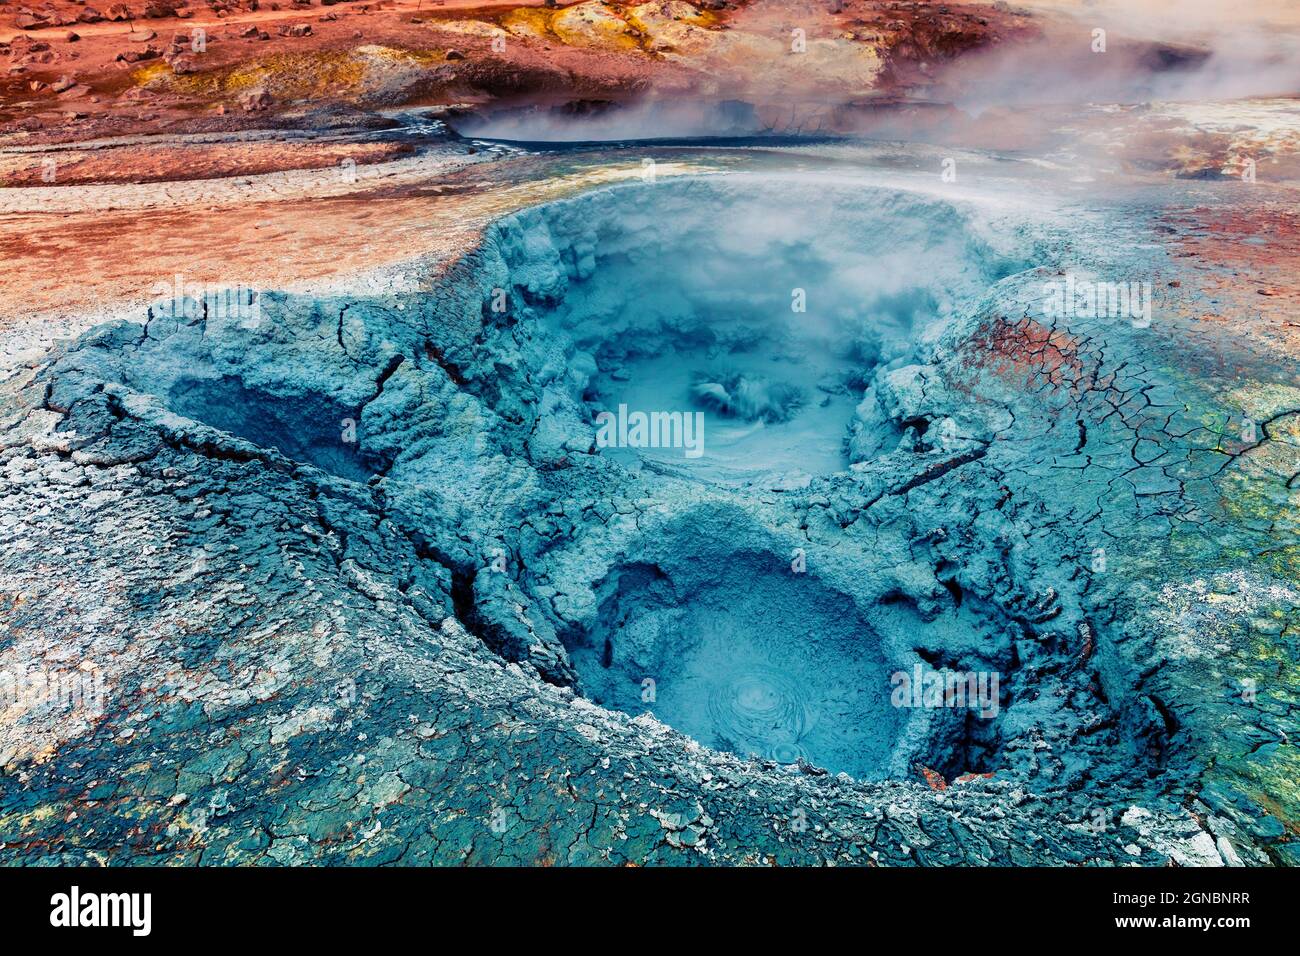 Boiling swamp in Geothermal valley Hverarond, located near Reykjahlid village in north of Iceland. Exotic desert landscape on volcanic ground. Artisti Stock Photo